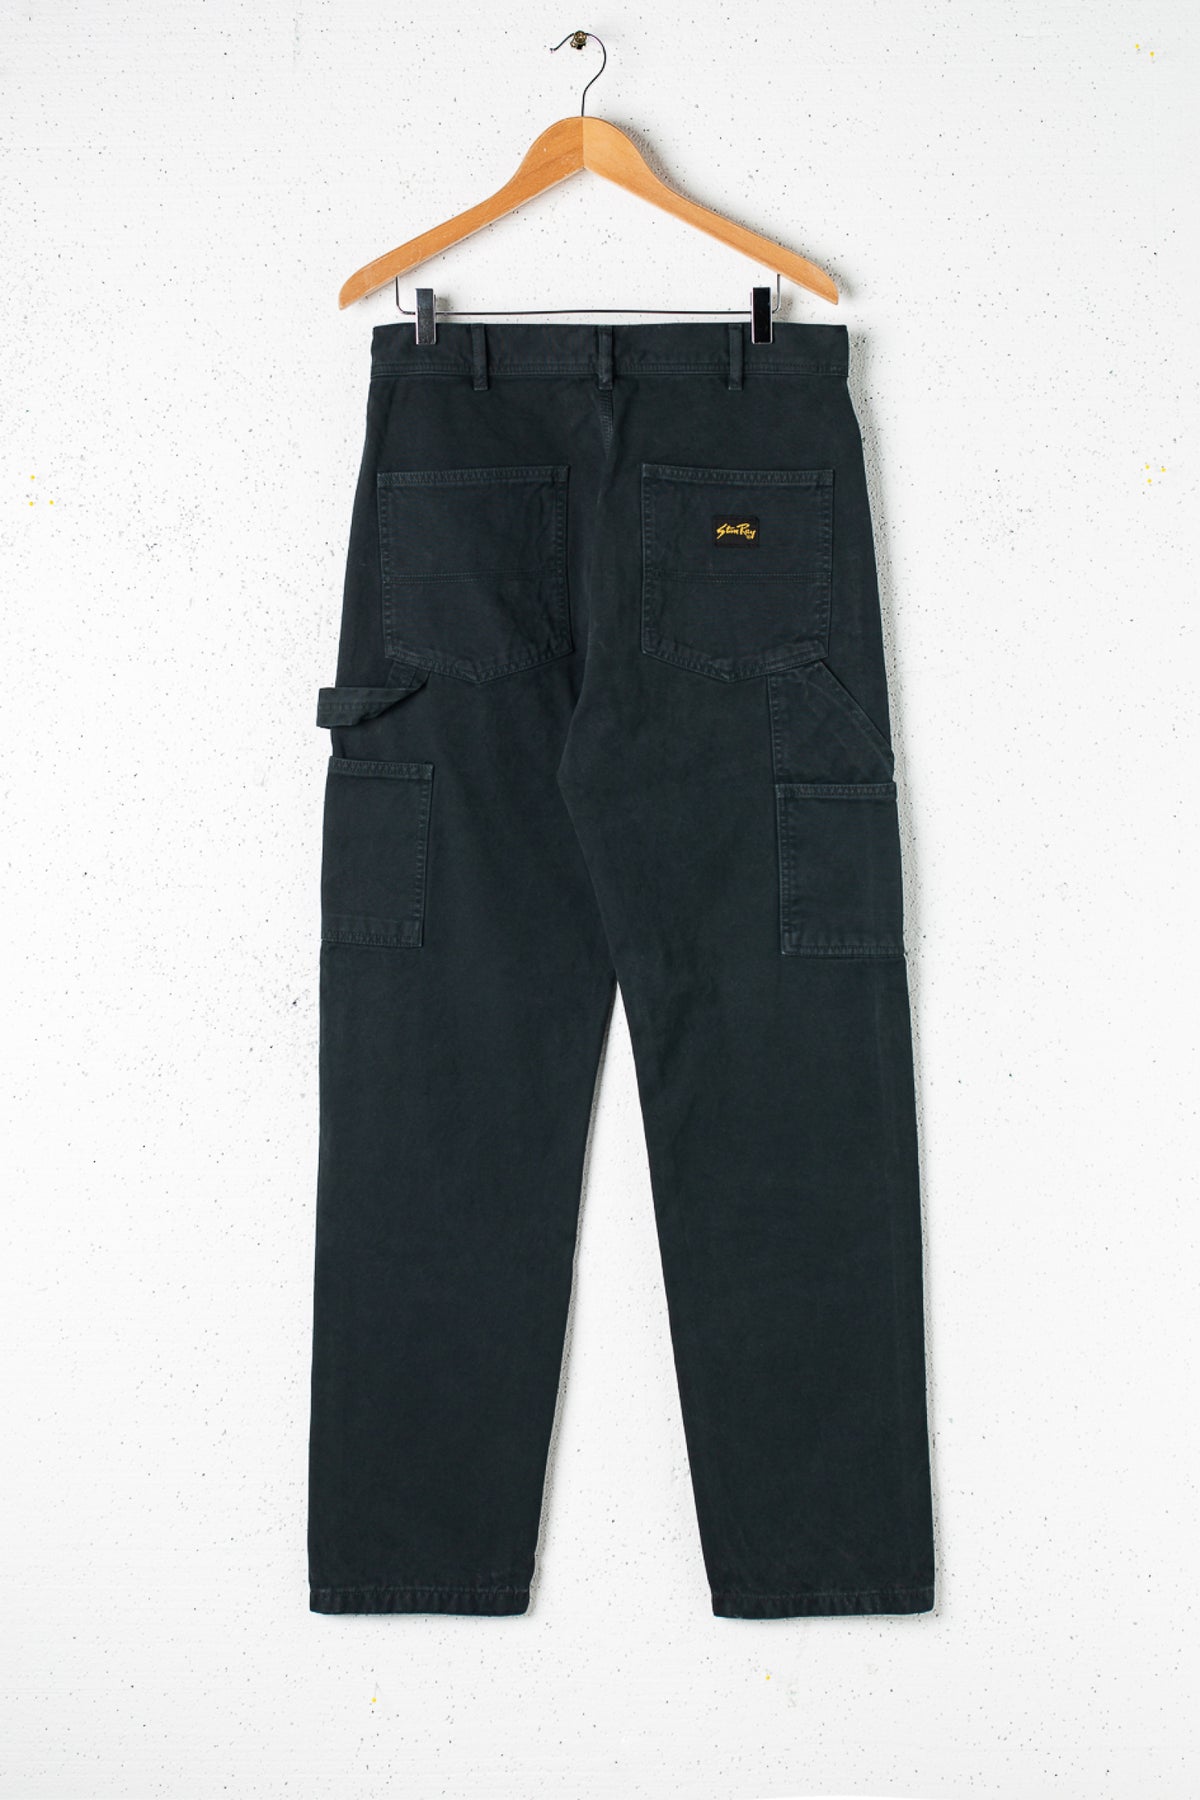 Stan Ray OG Painter Pant - Black Duck , Jeans, Stan Ray, Working Title